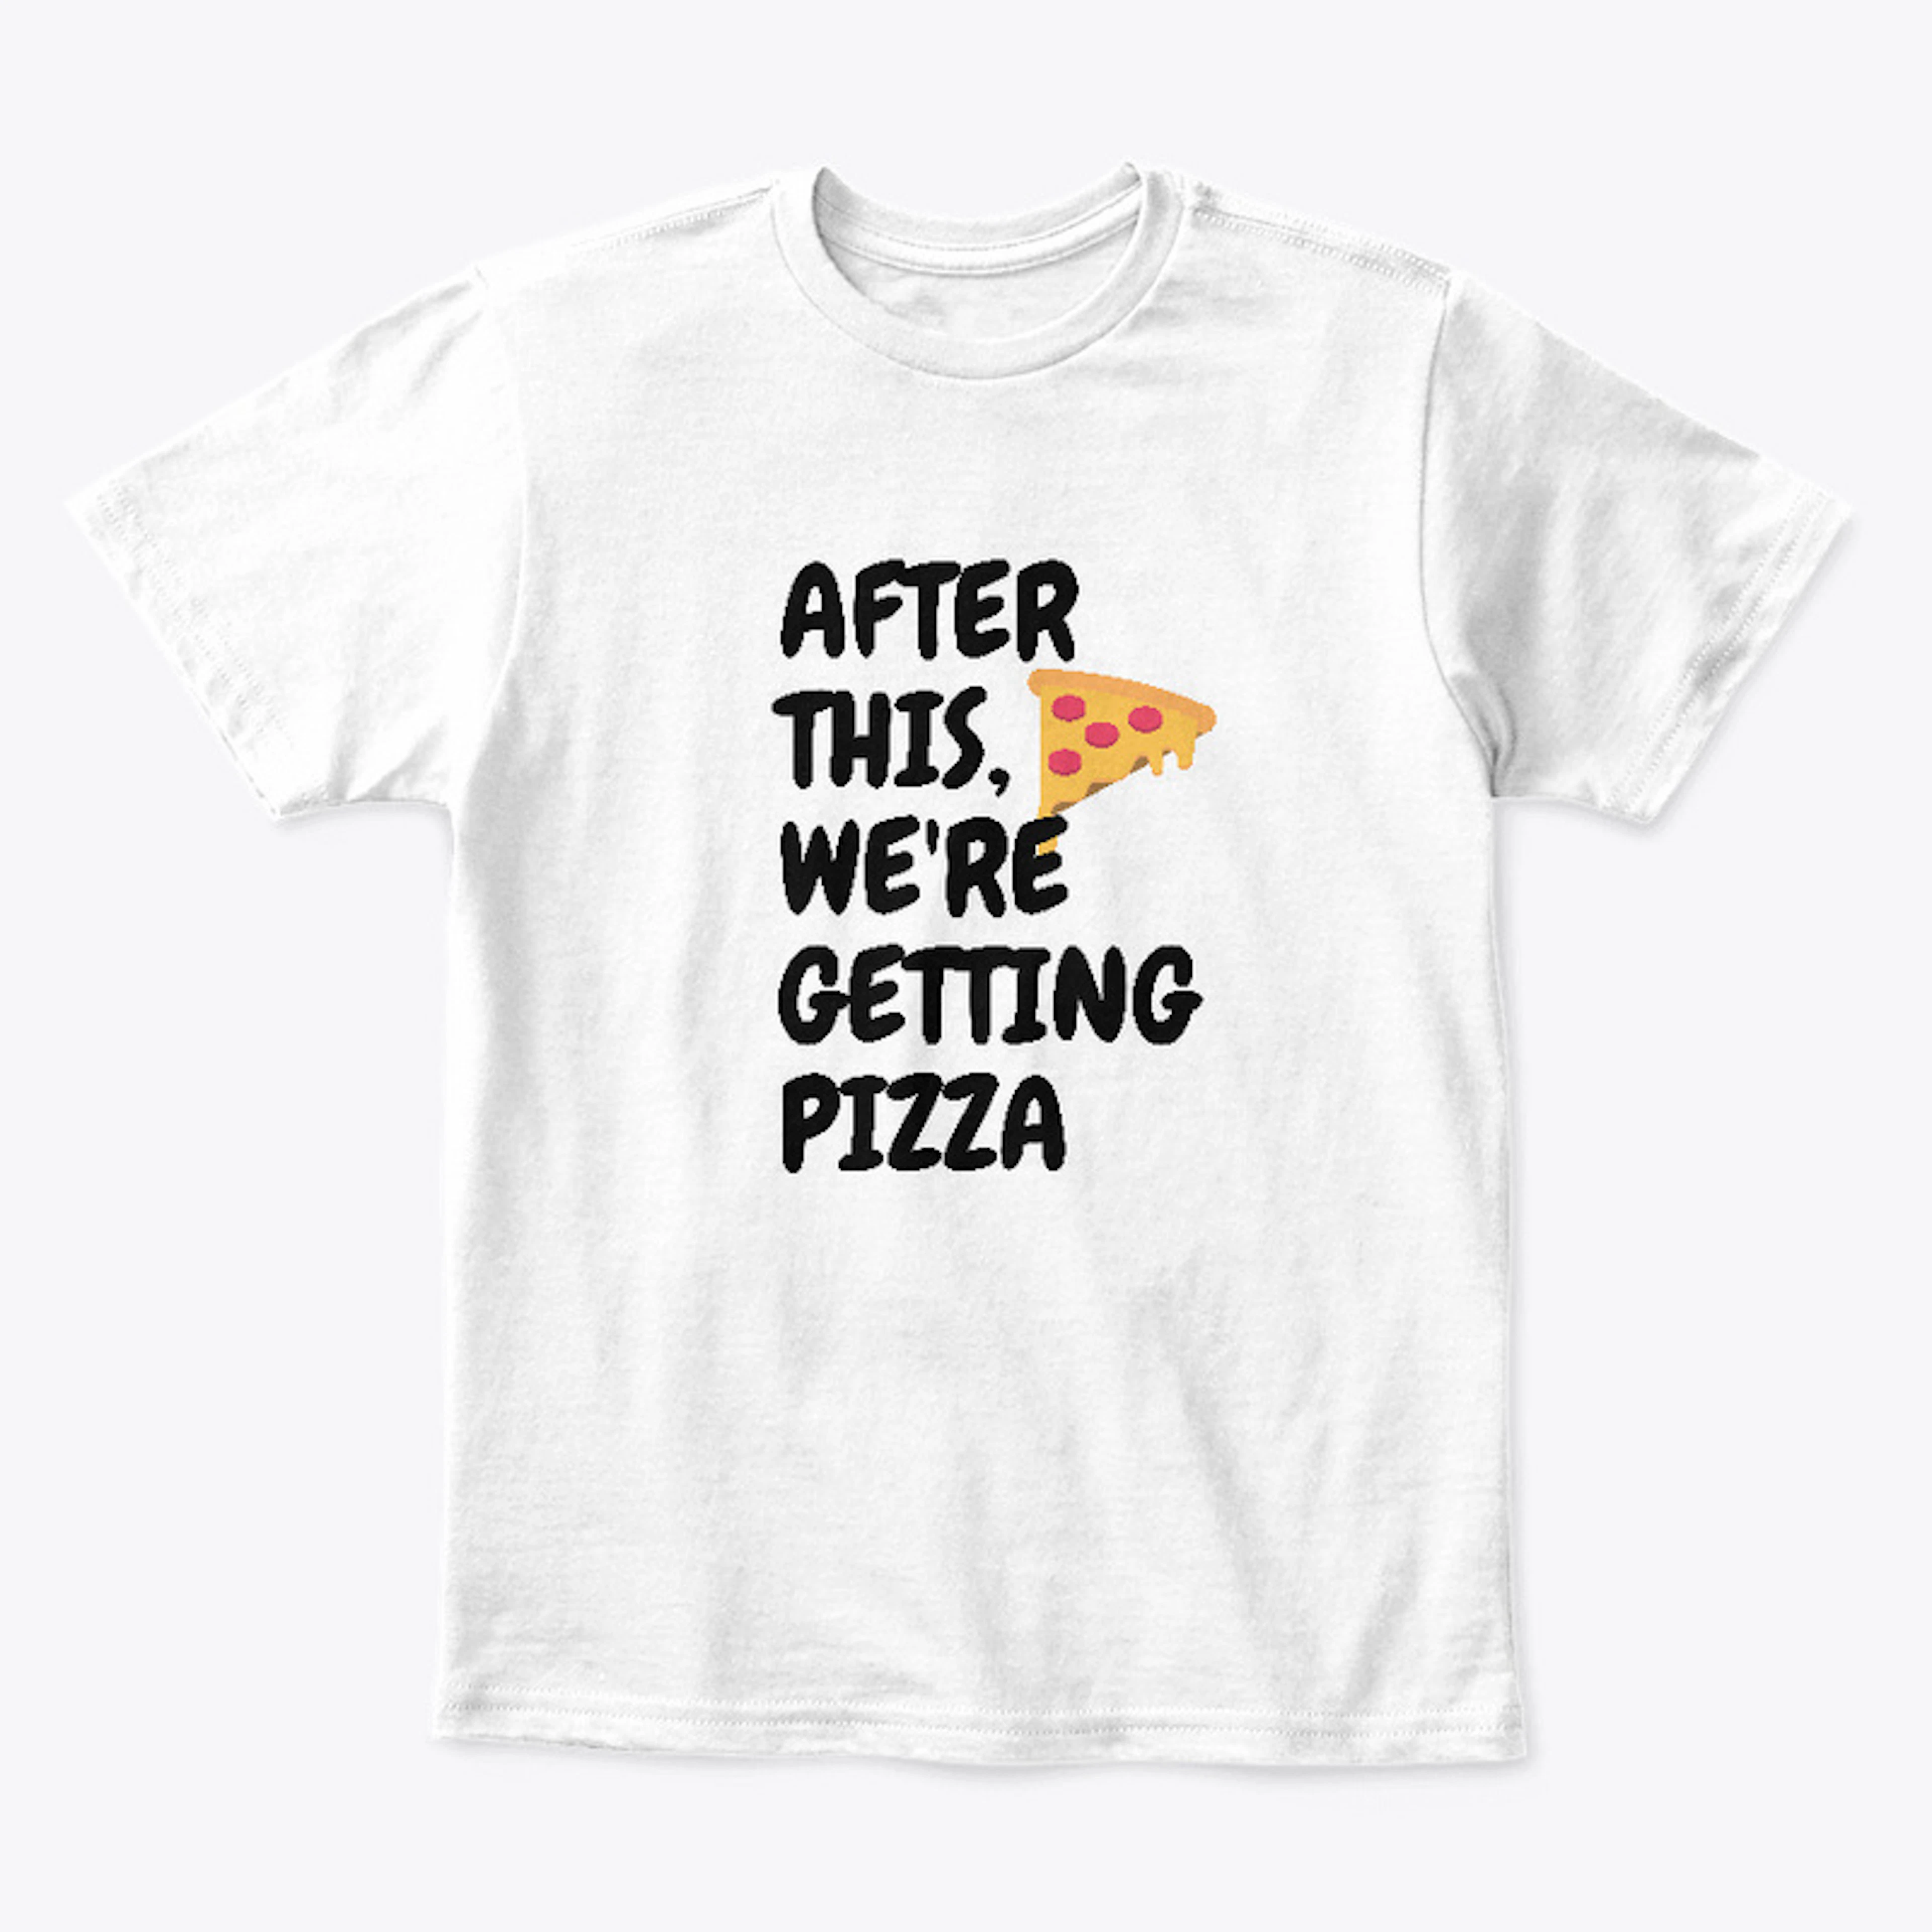 After this, we're getting pizza kids tee